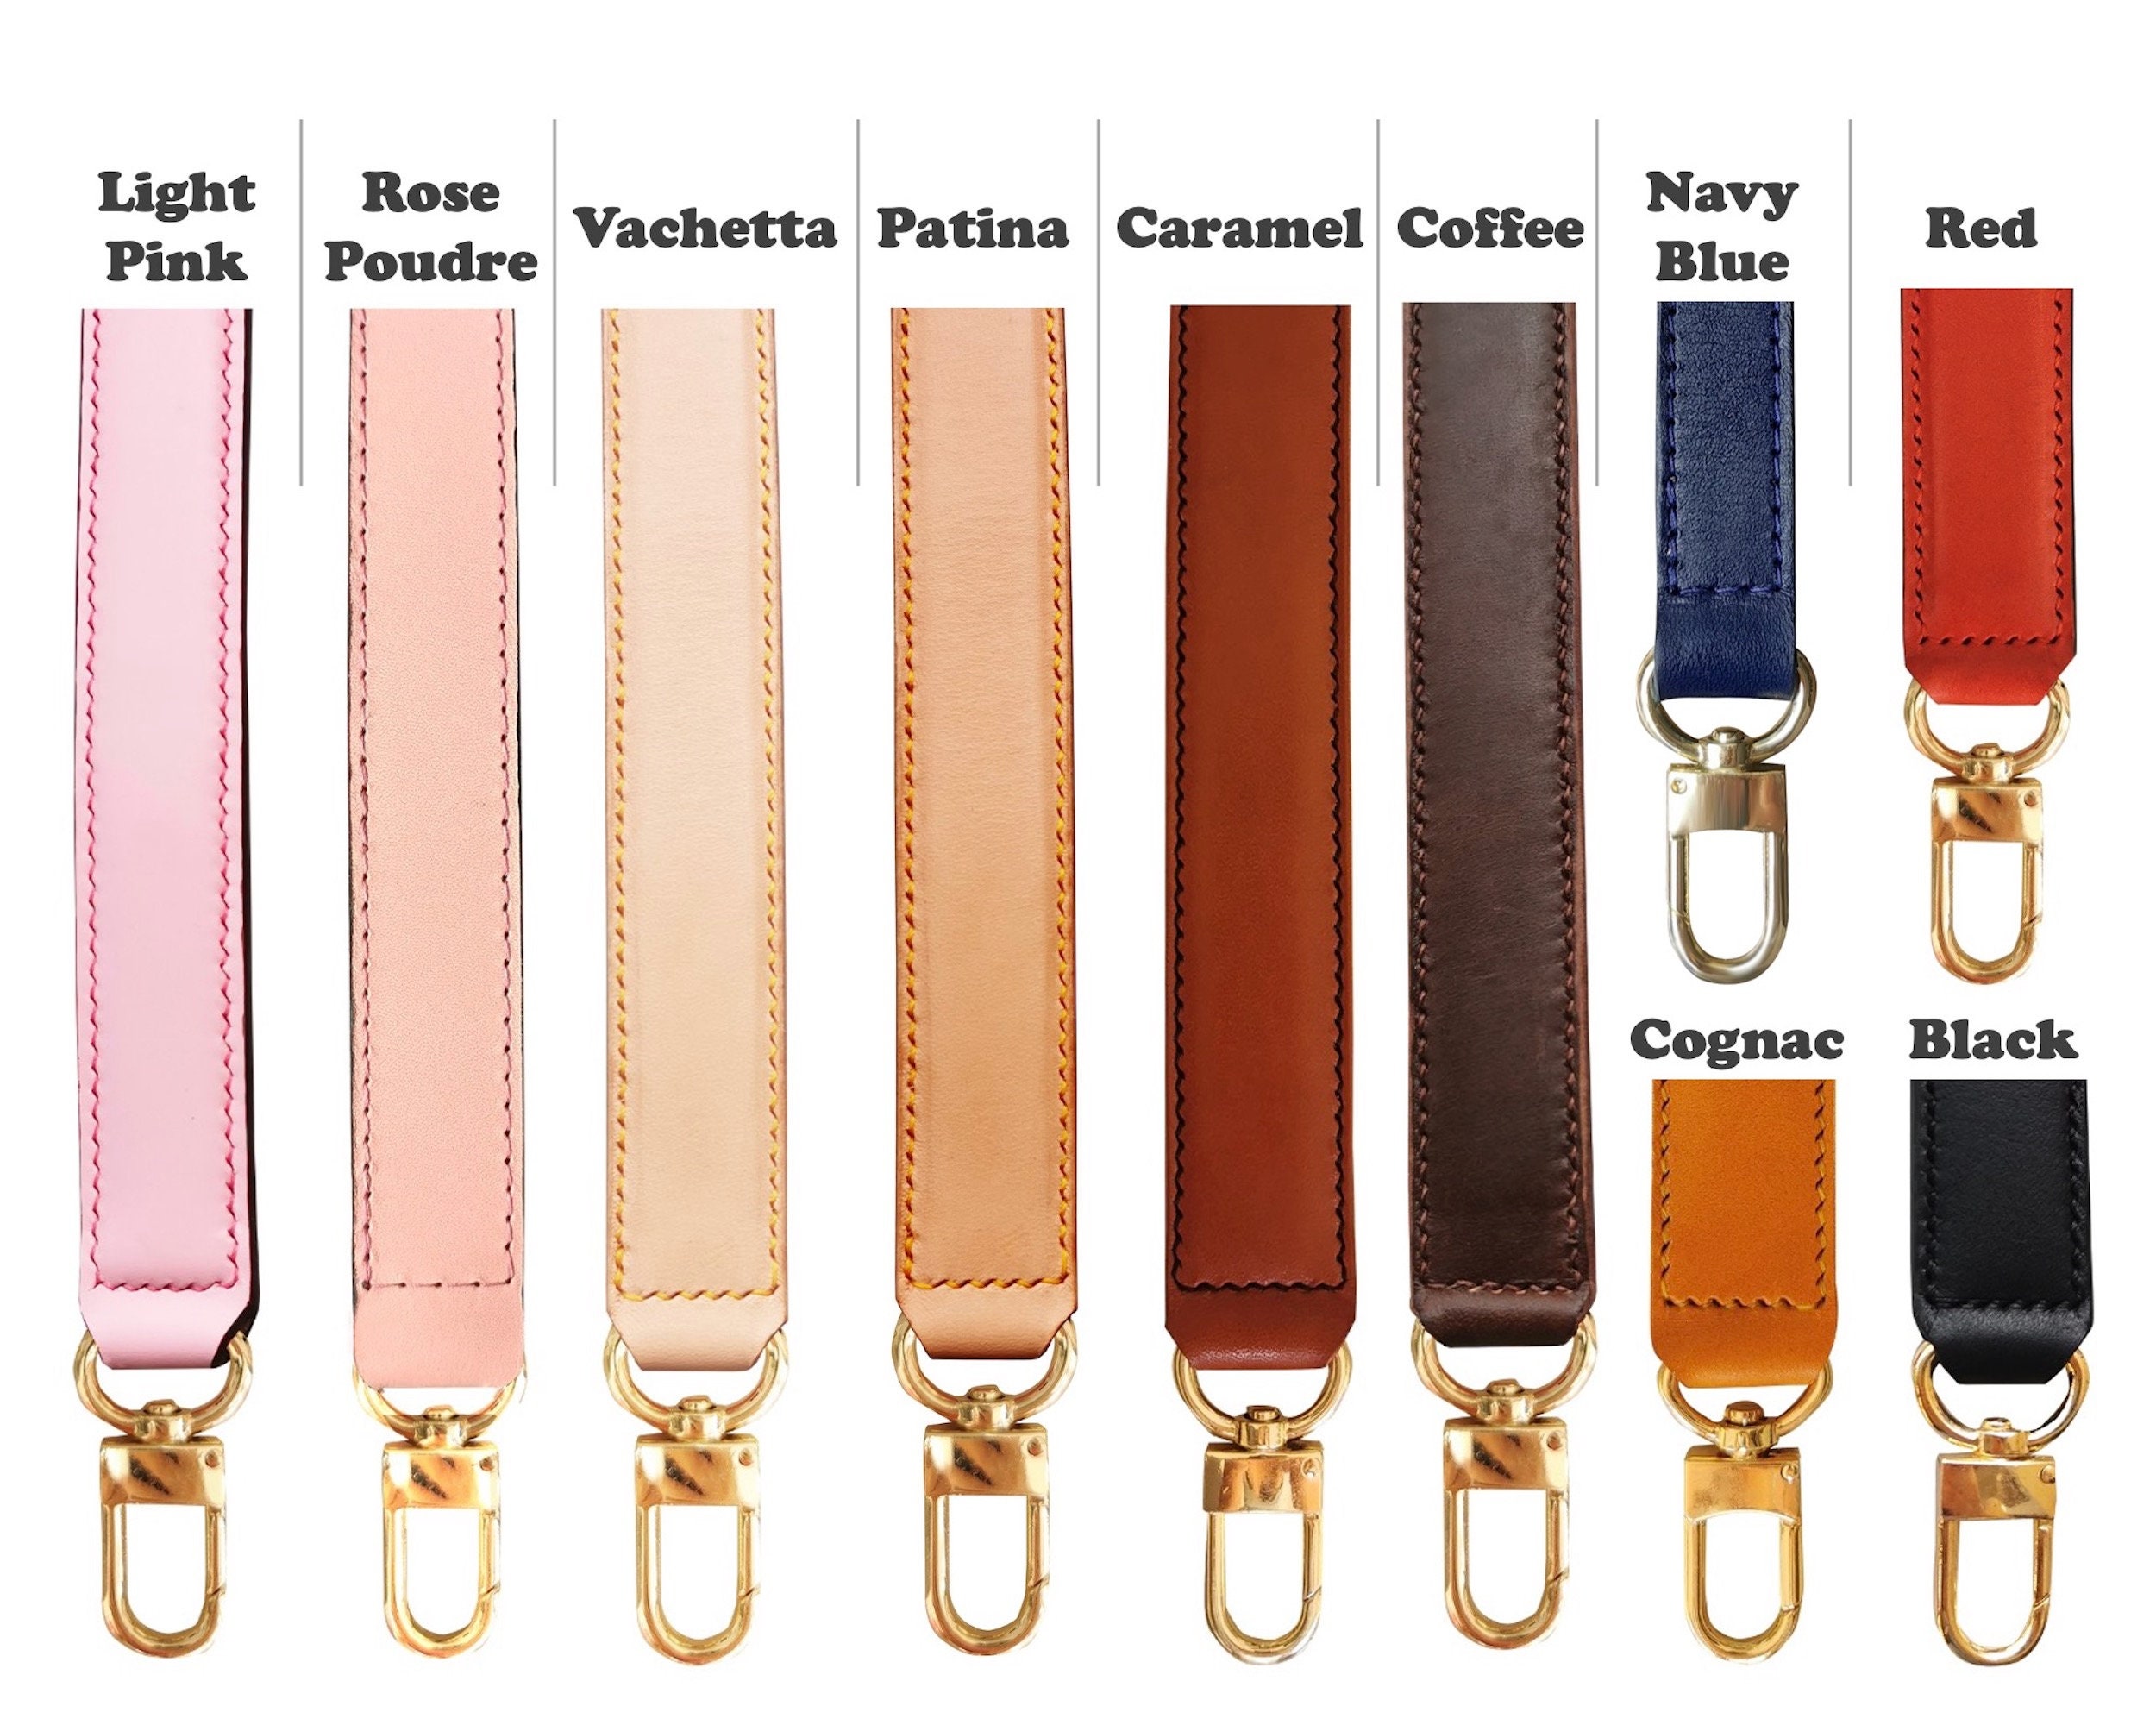 New Vachetta Leather Crossbody Shoulder Strap Replacement For